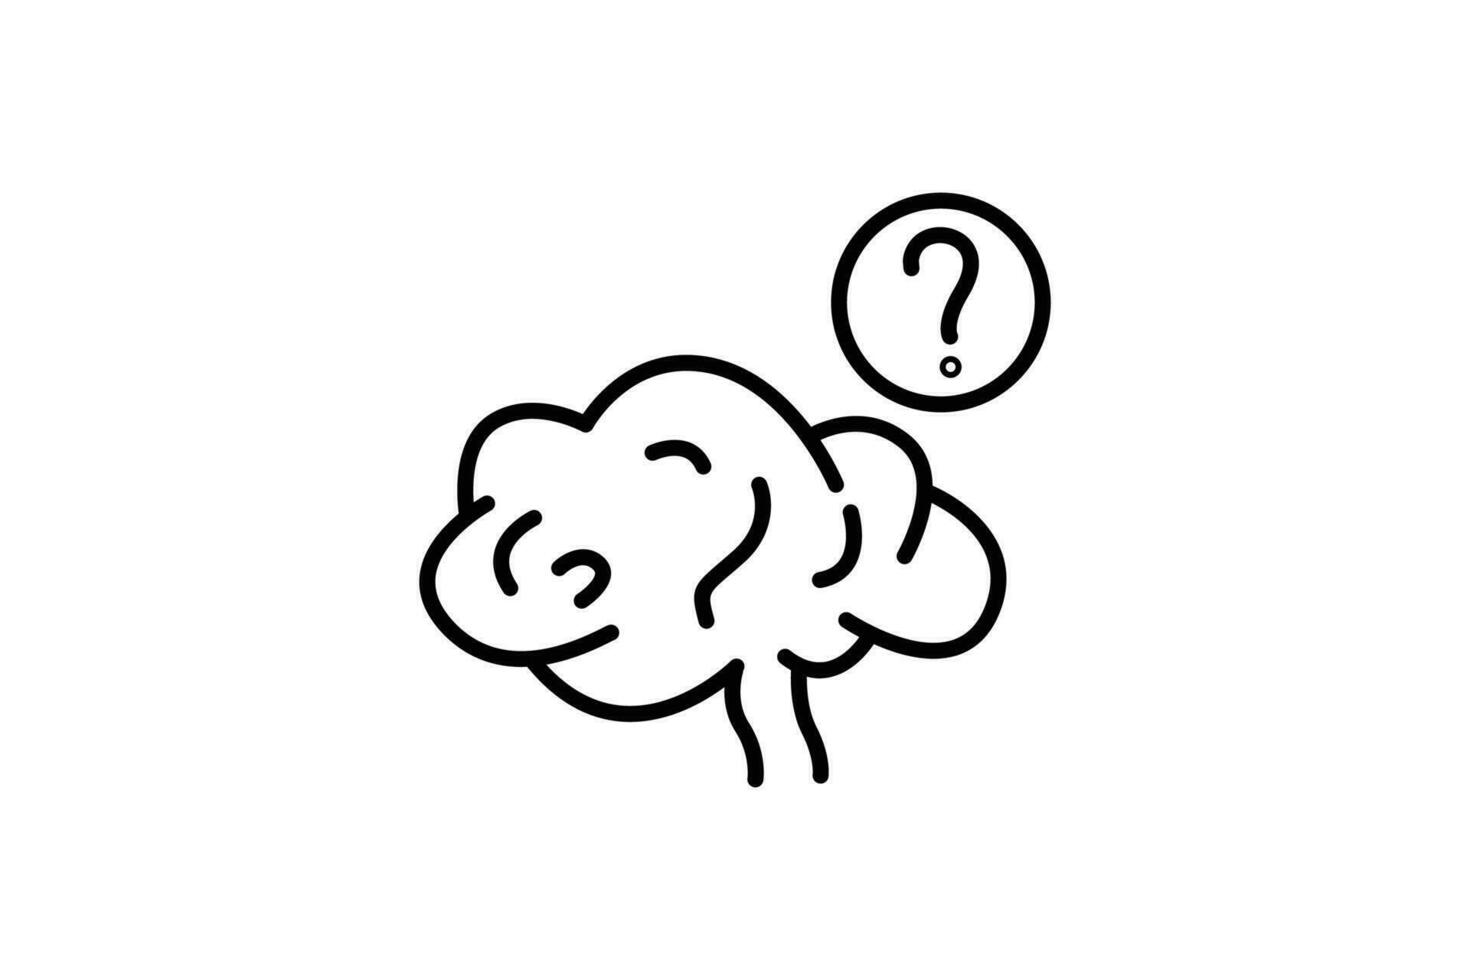 Brain question icon. Icon related to critical thinking. suitable for web site design, app, UI, user interfaces, printable etc. Line icon style. Simple vector design editable